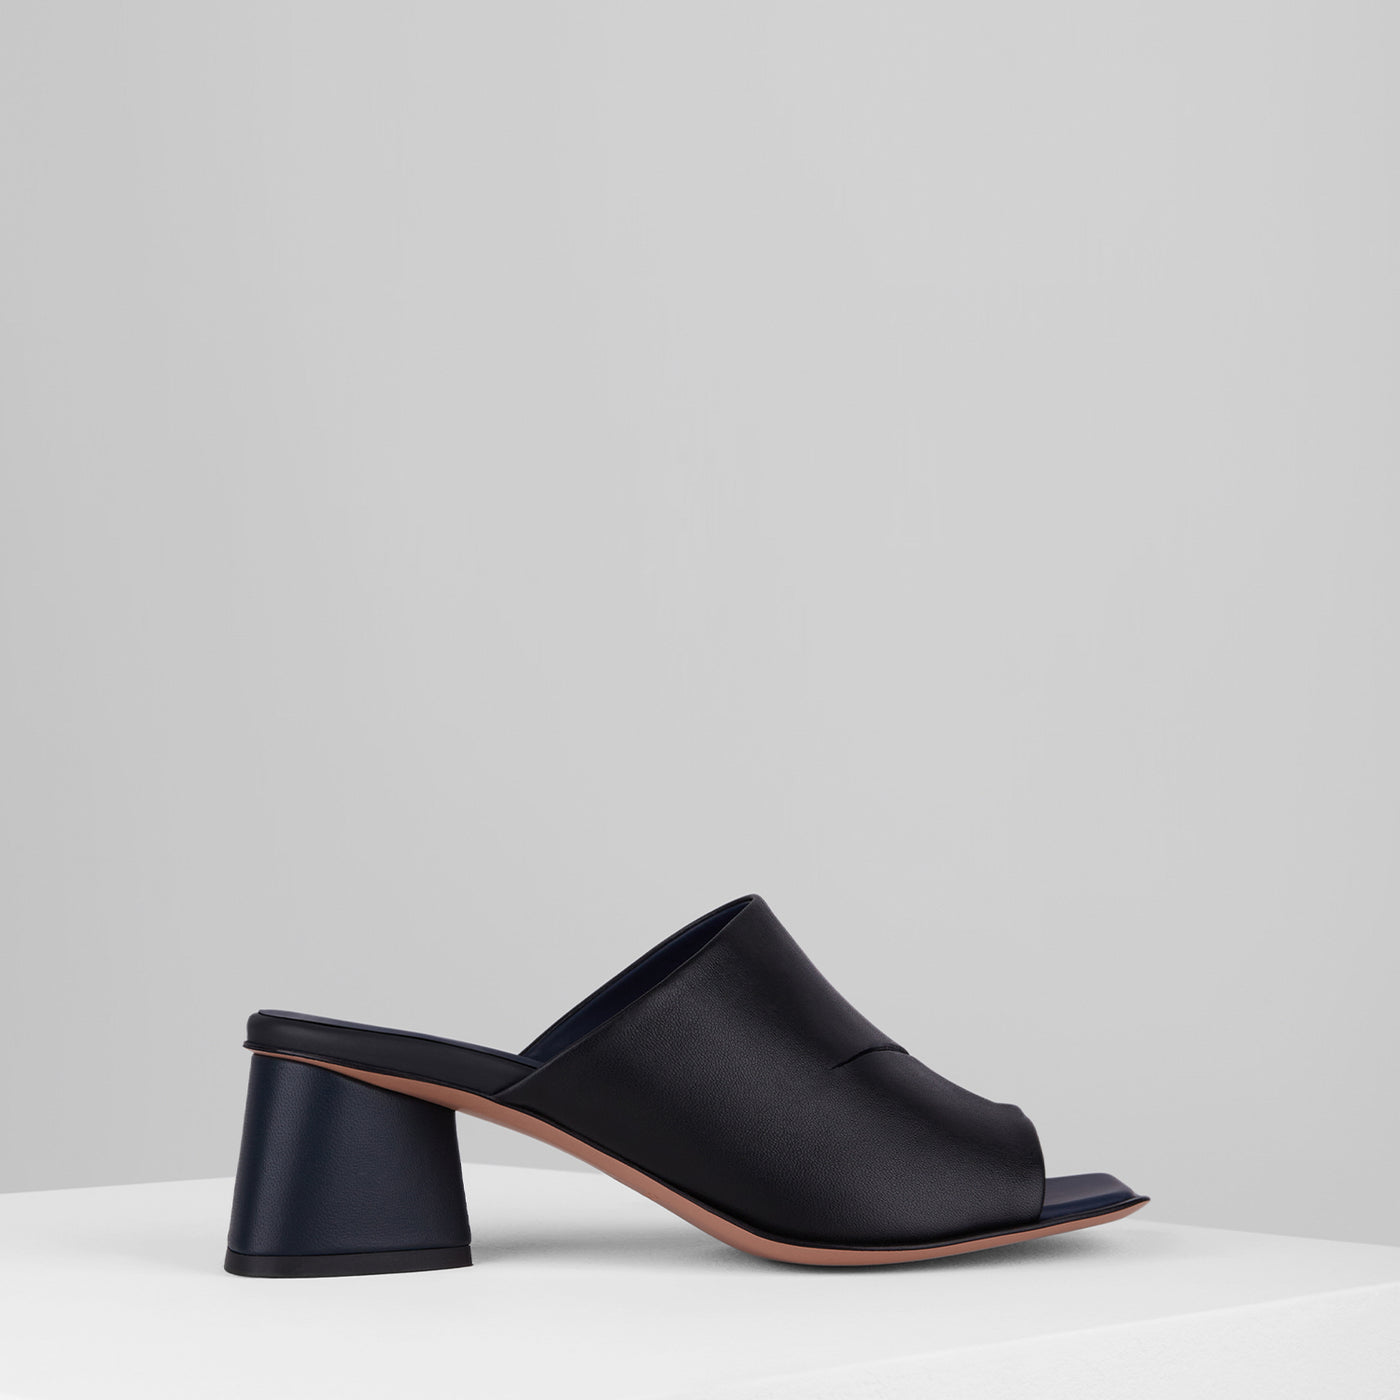 Load image into Gallery viewer, Spacco Sandals in Nero